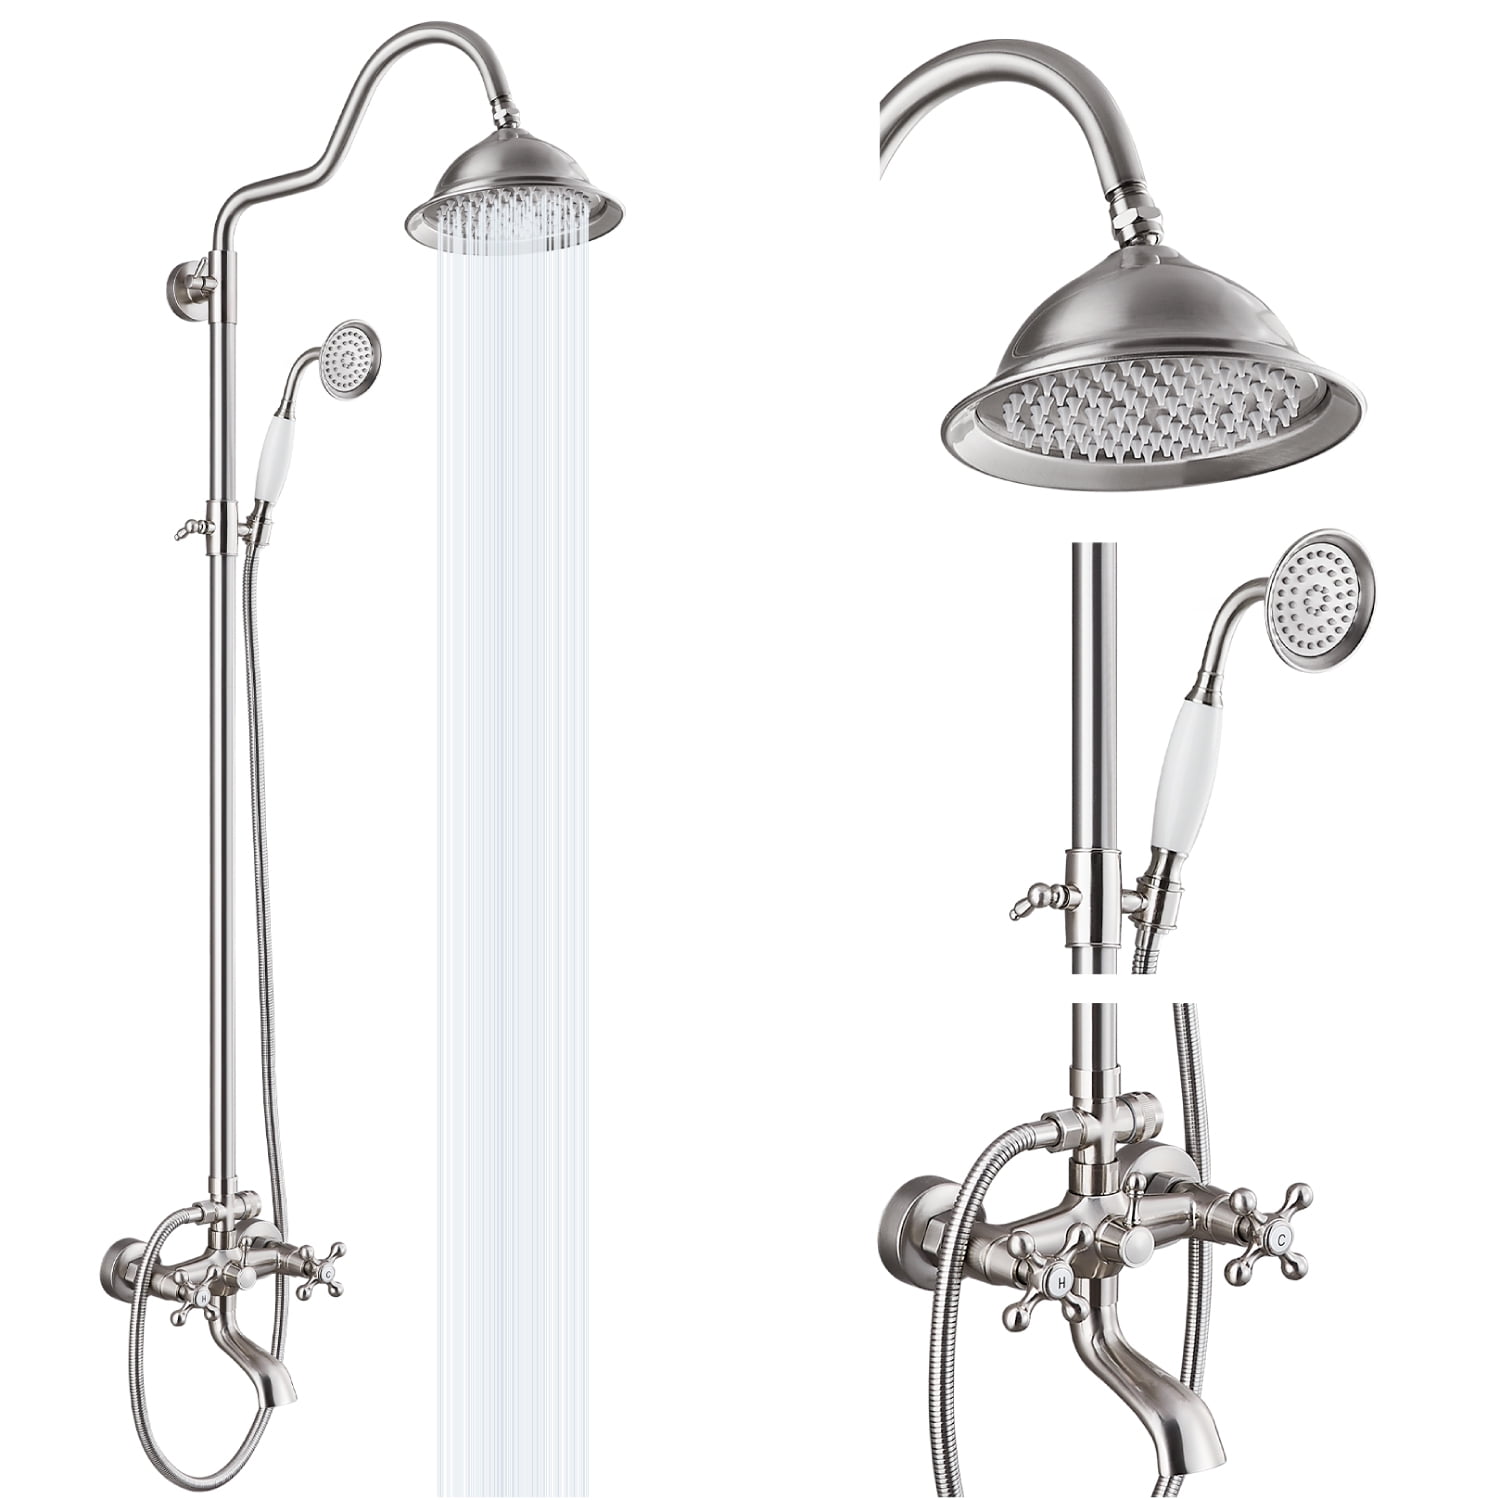 Brushed Nickle 8"Rain Shower Faucet Set Bath Tub Mixer Tap With Handle Spray 